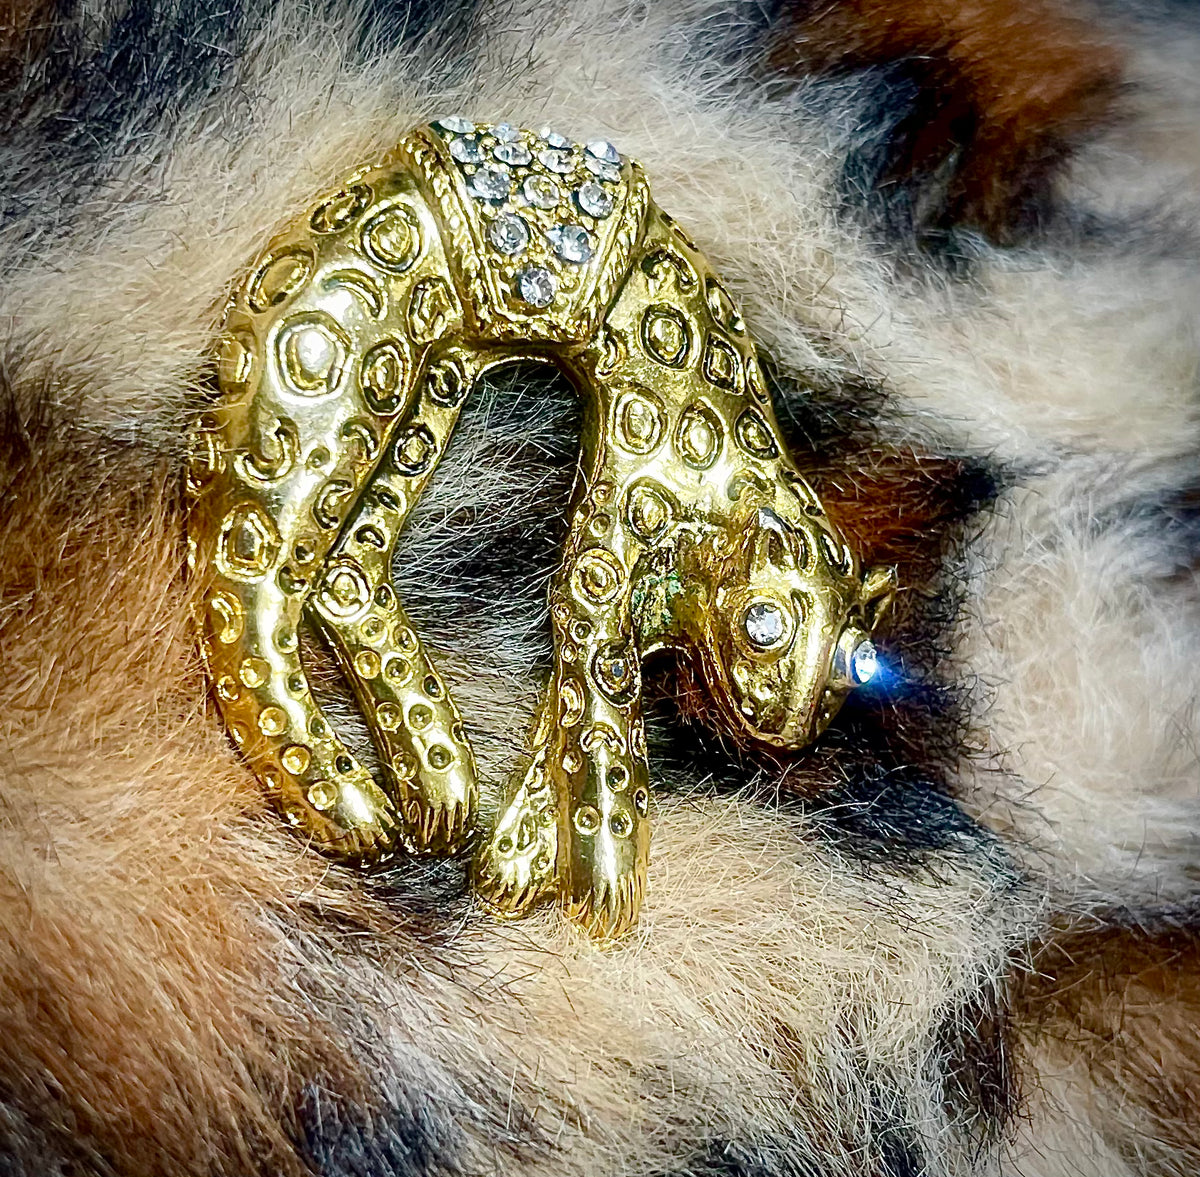 Vintage 1960’s Gold Jaguar Brooch with Rhinestone Accents